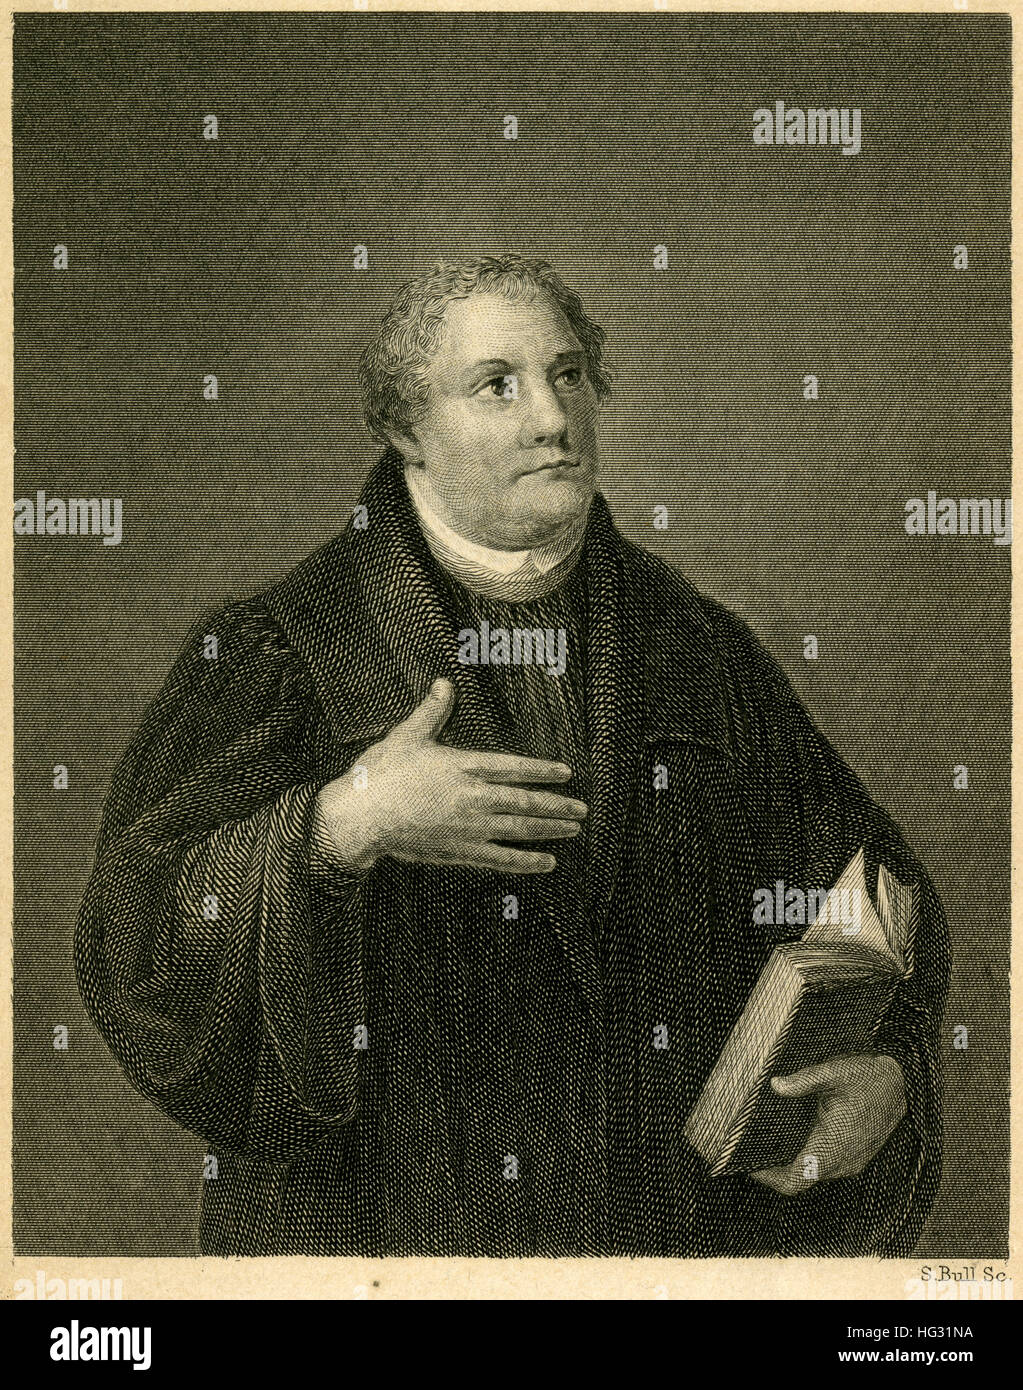 Antique c1840 engraving, Dr. Martin Luther. Martin Luther (1483-1546) was a German professor of theology, composer, priest, monk and a seminal figure in the Protestant Reformation. SOURCE: ORIGINAL ENGRAVING. Stock Photo